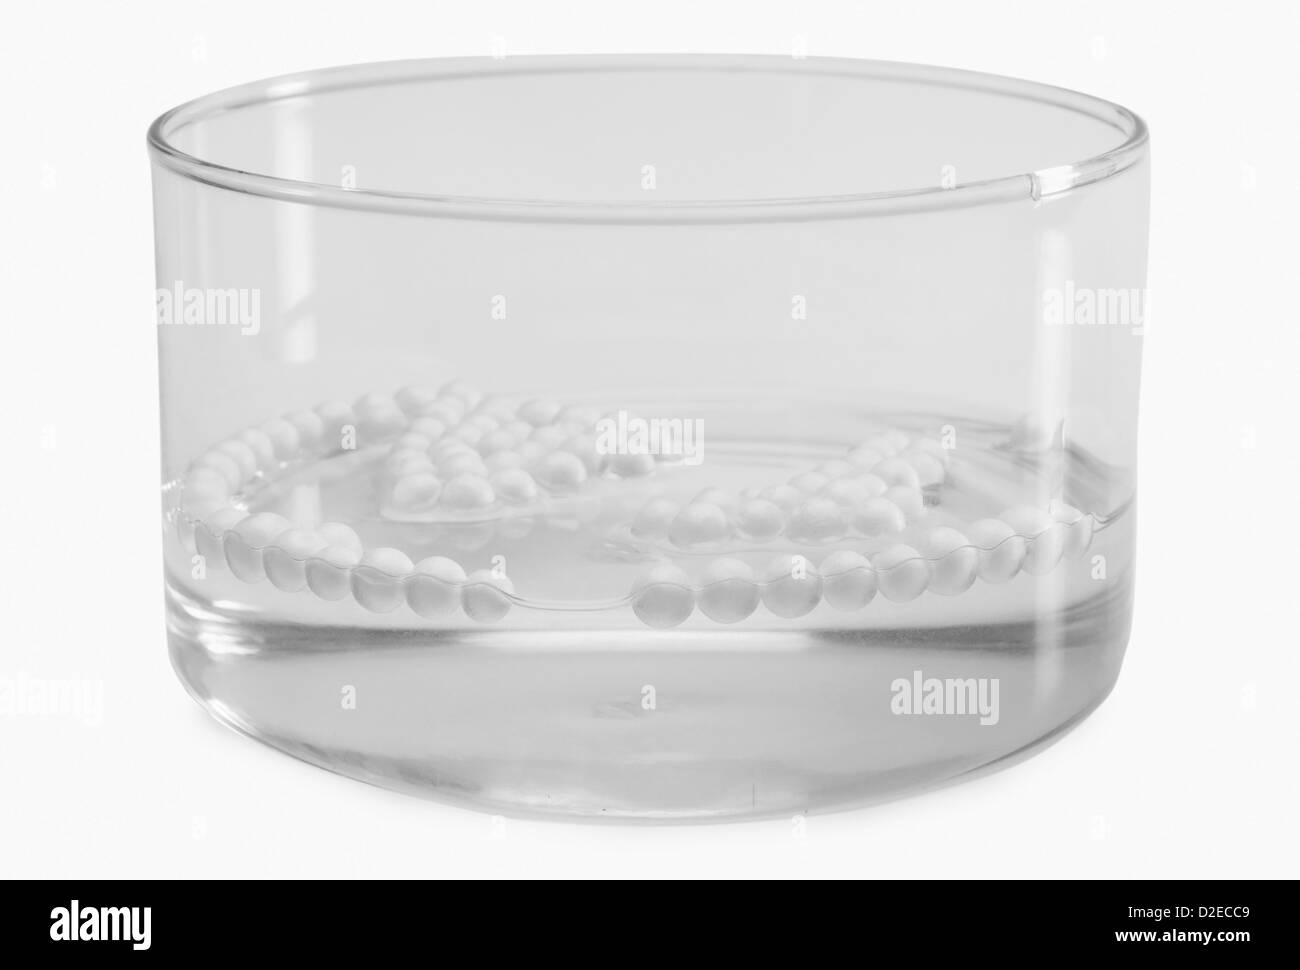 The physical properties of water and the Styrofoam discs (white and